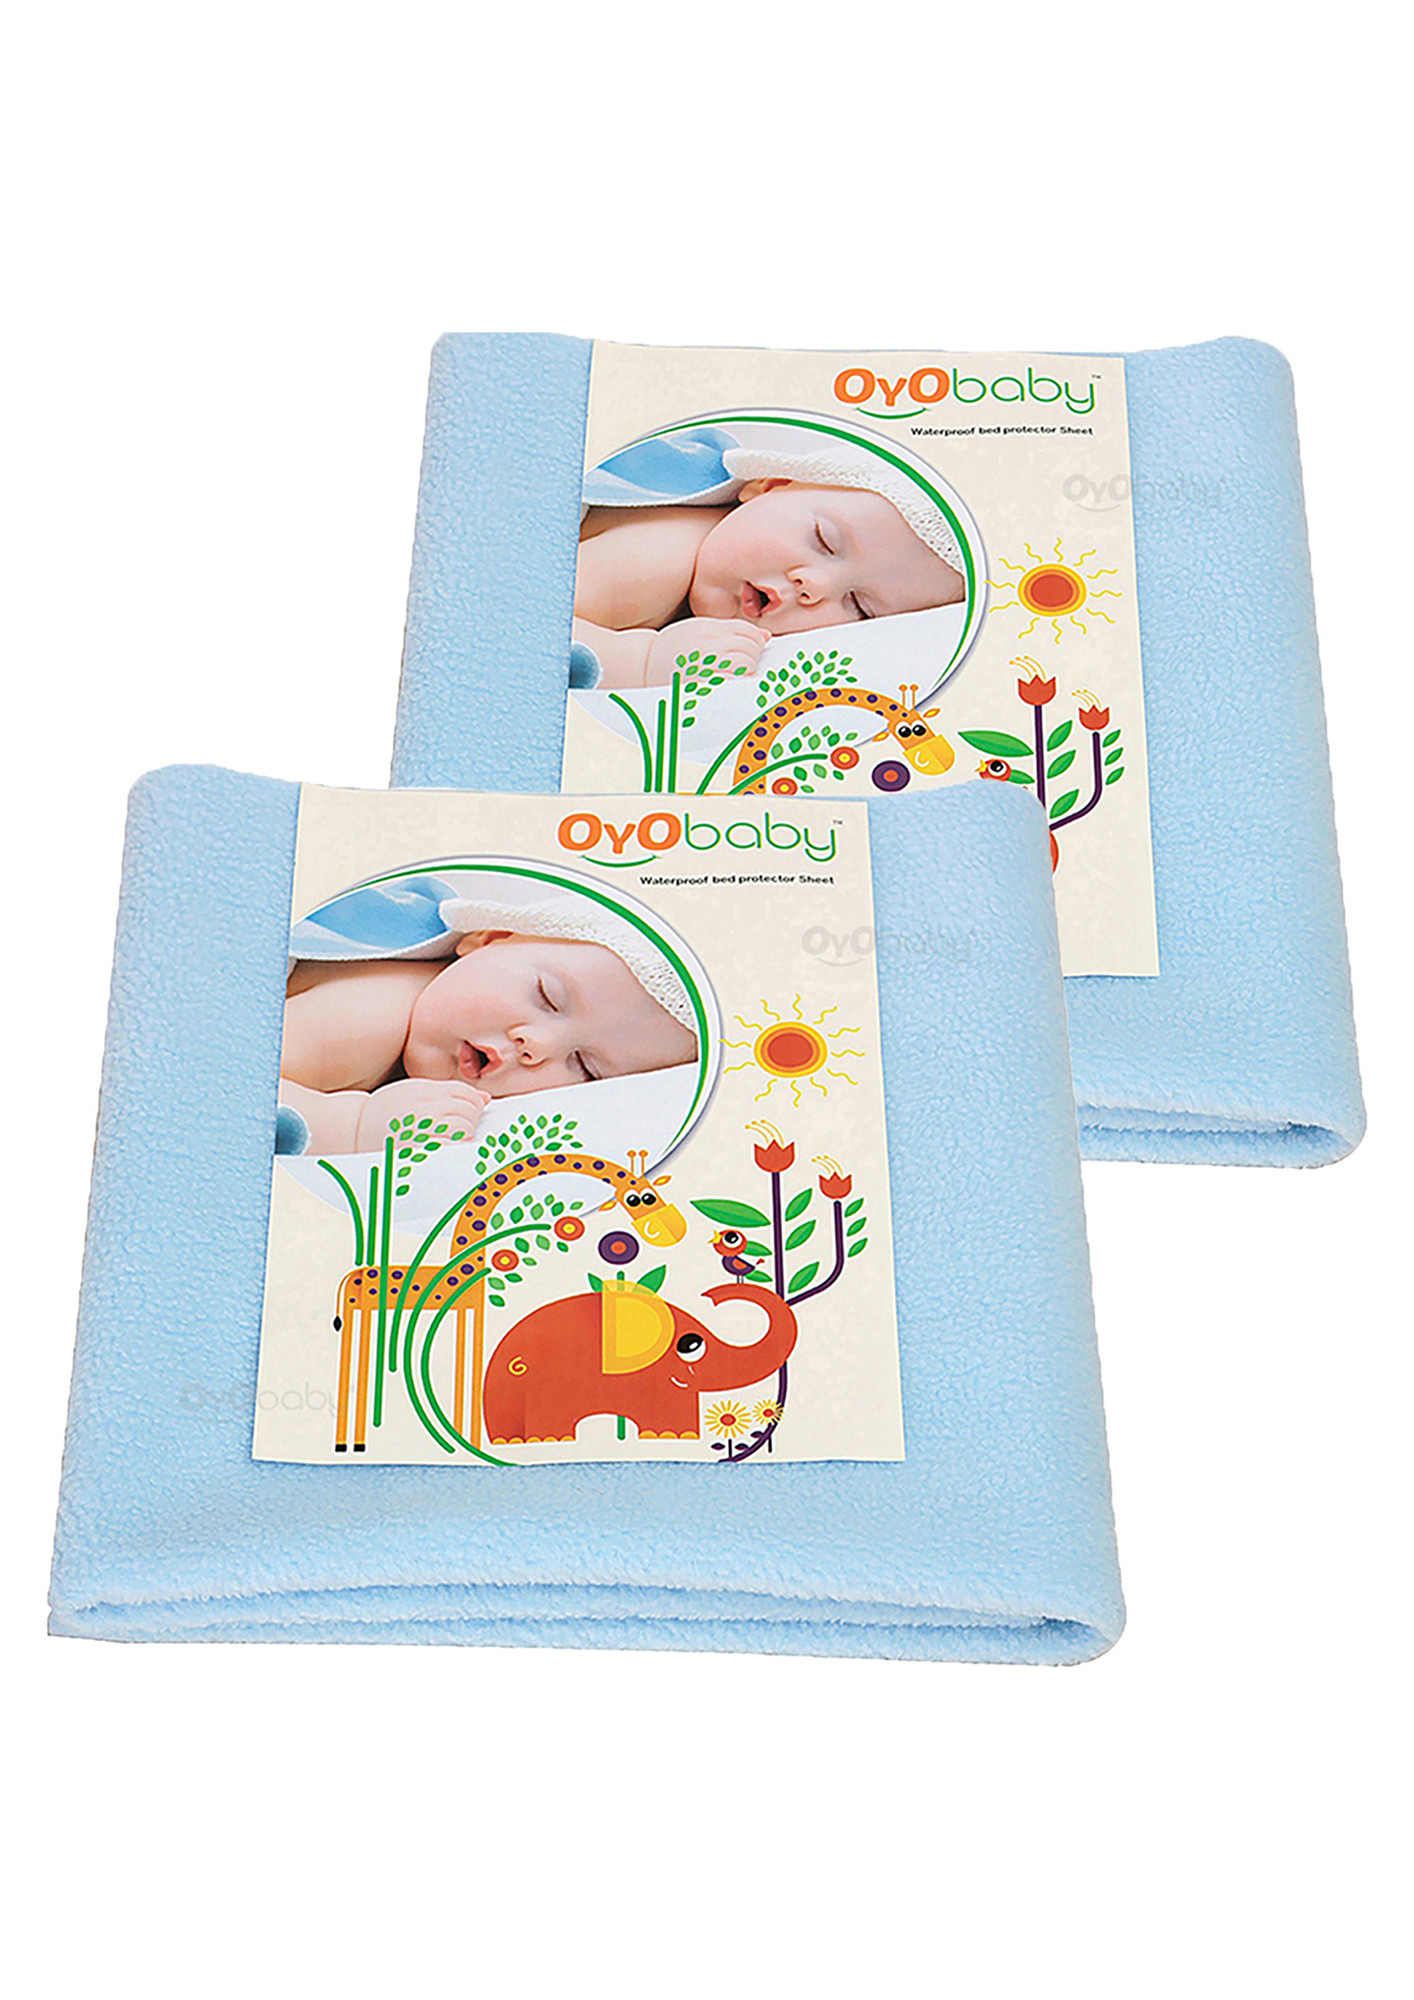 Oyo Baby Cotton Baby Bed Protecting Mat (Blue, Small, Pack of 2)-OB-2025-B